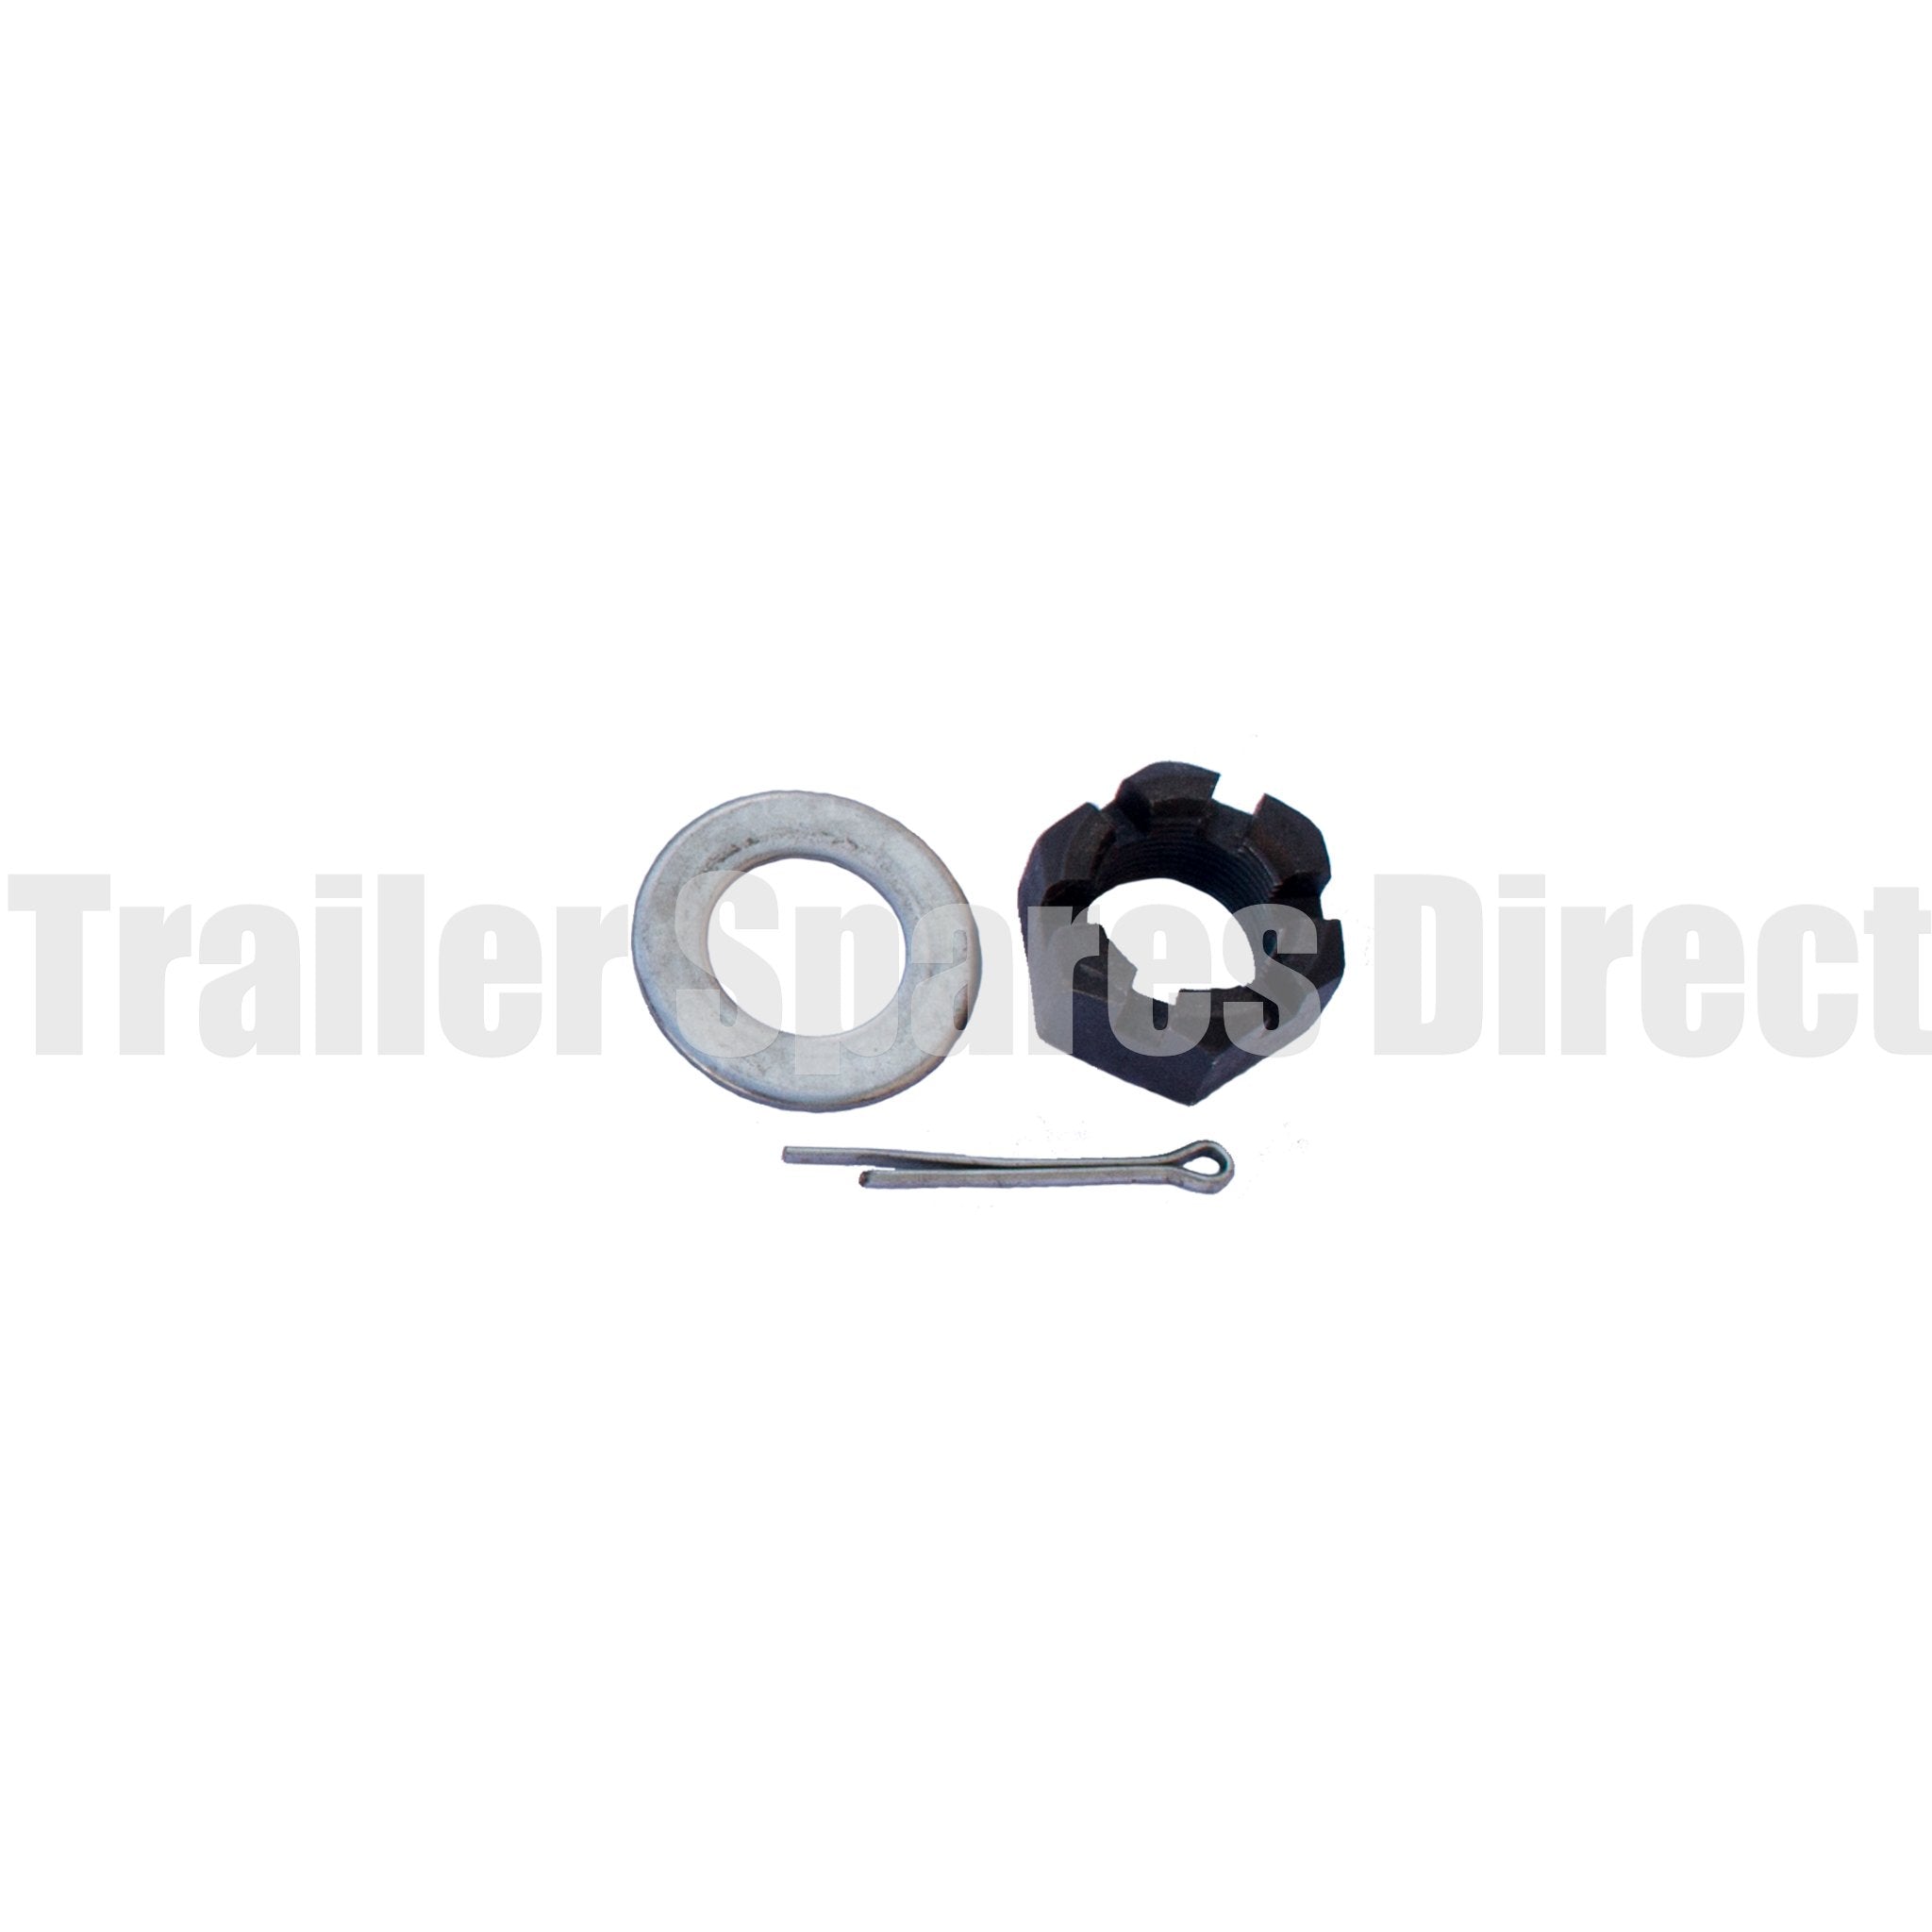 Axle nut washer and split pin kit